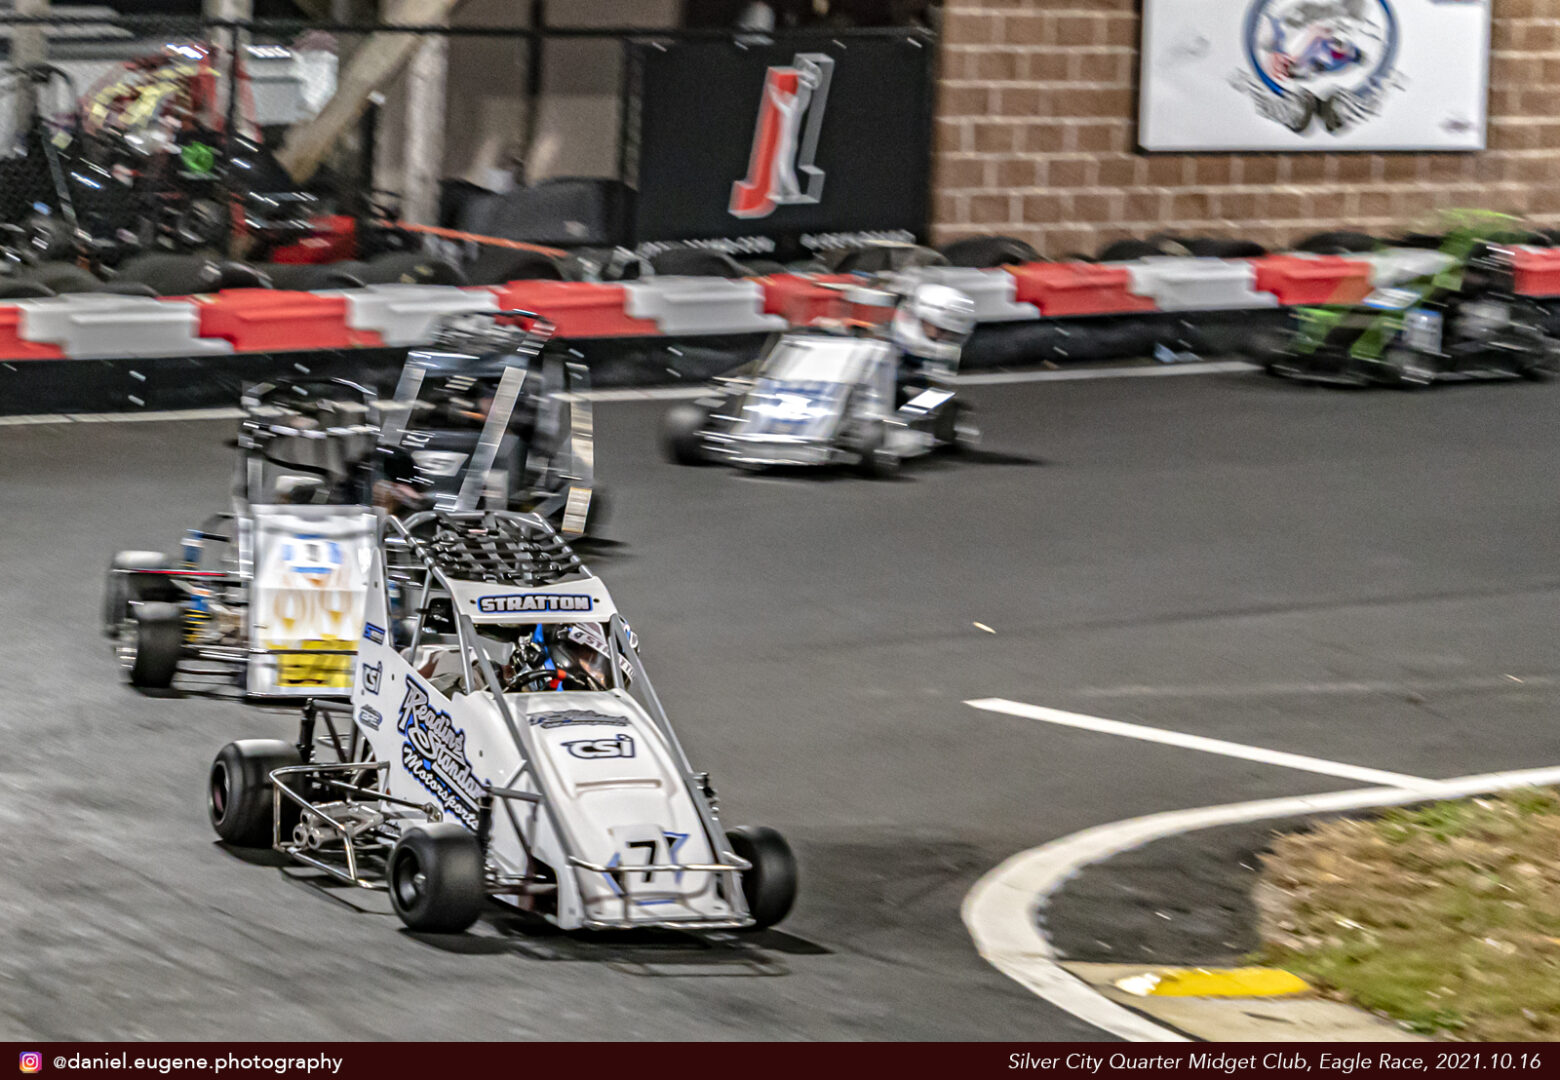 White Color Child Racing Karts on a Racing Track